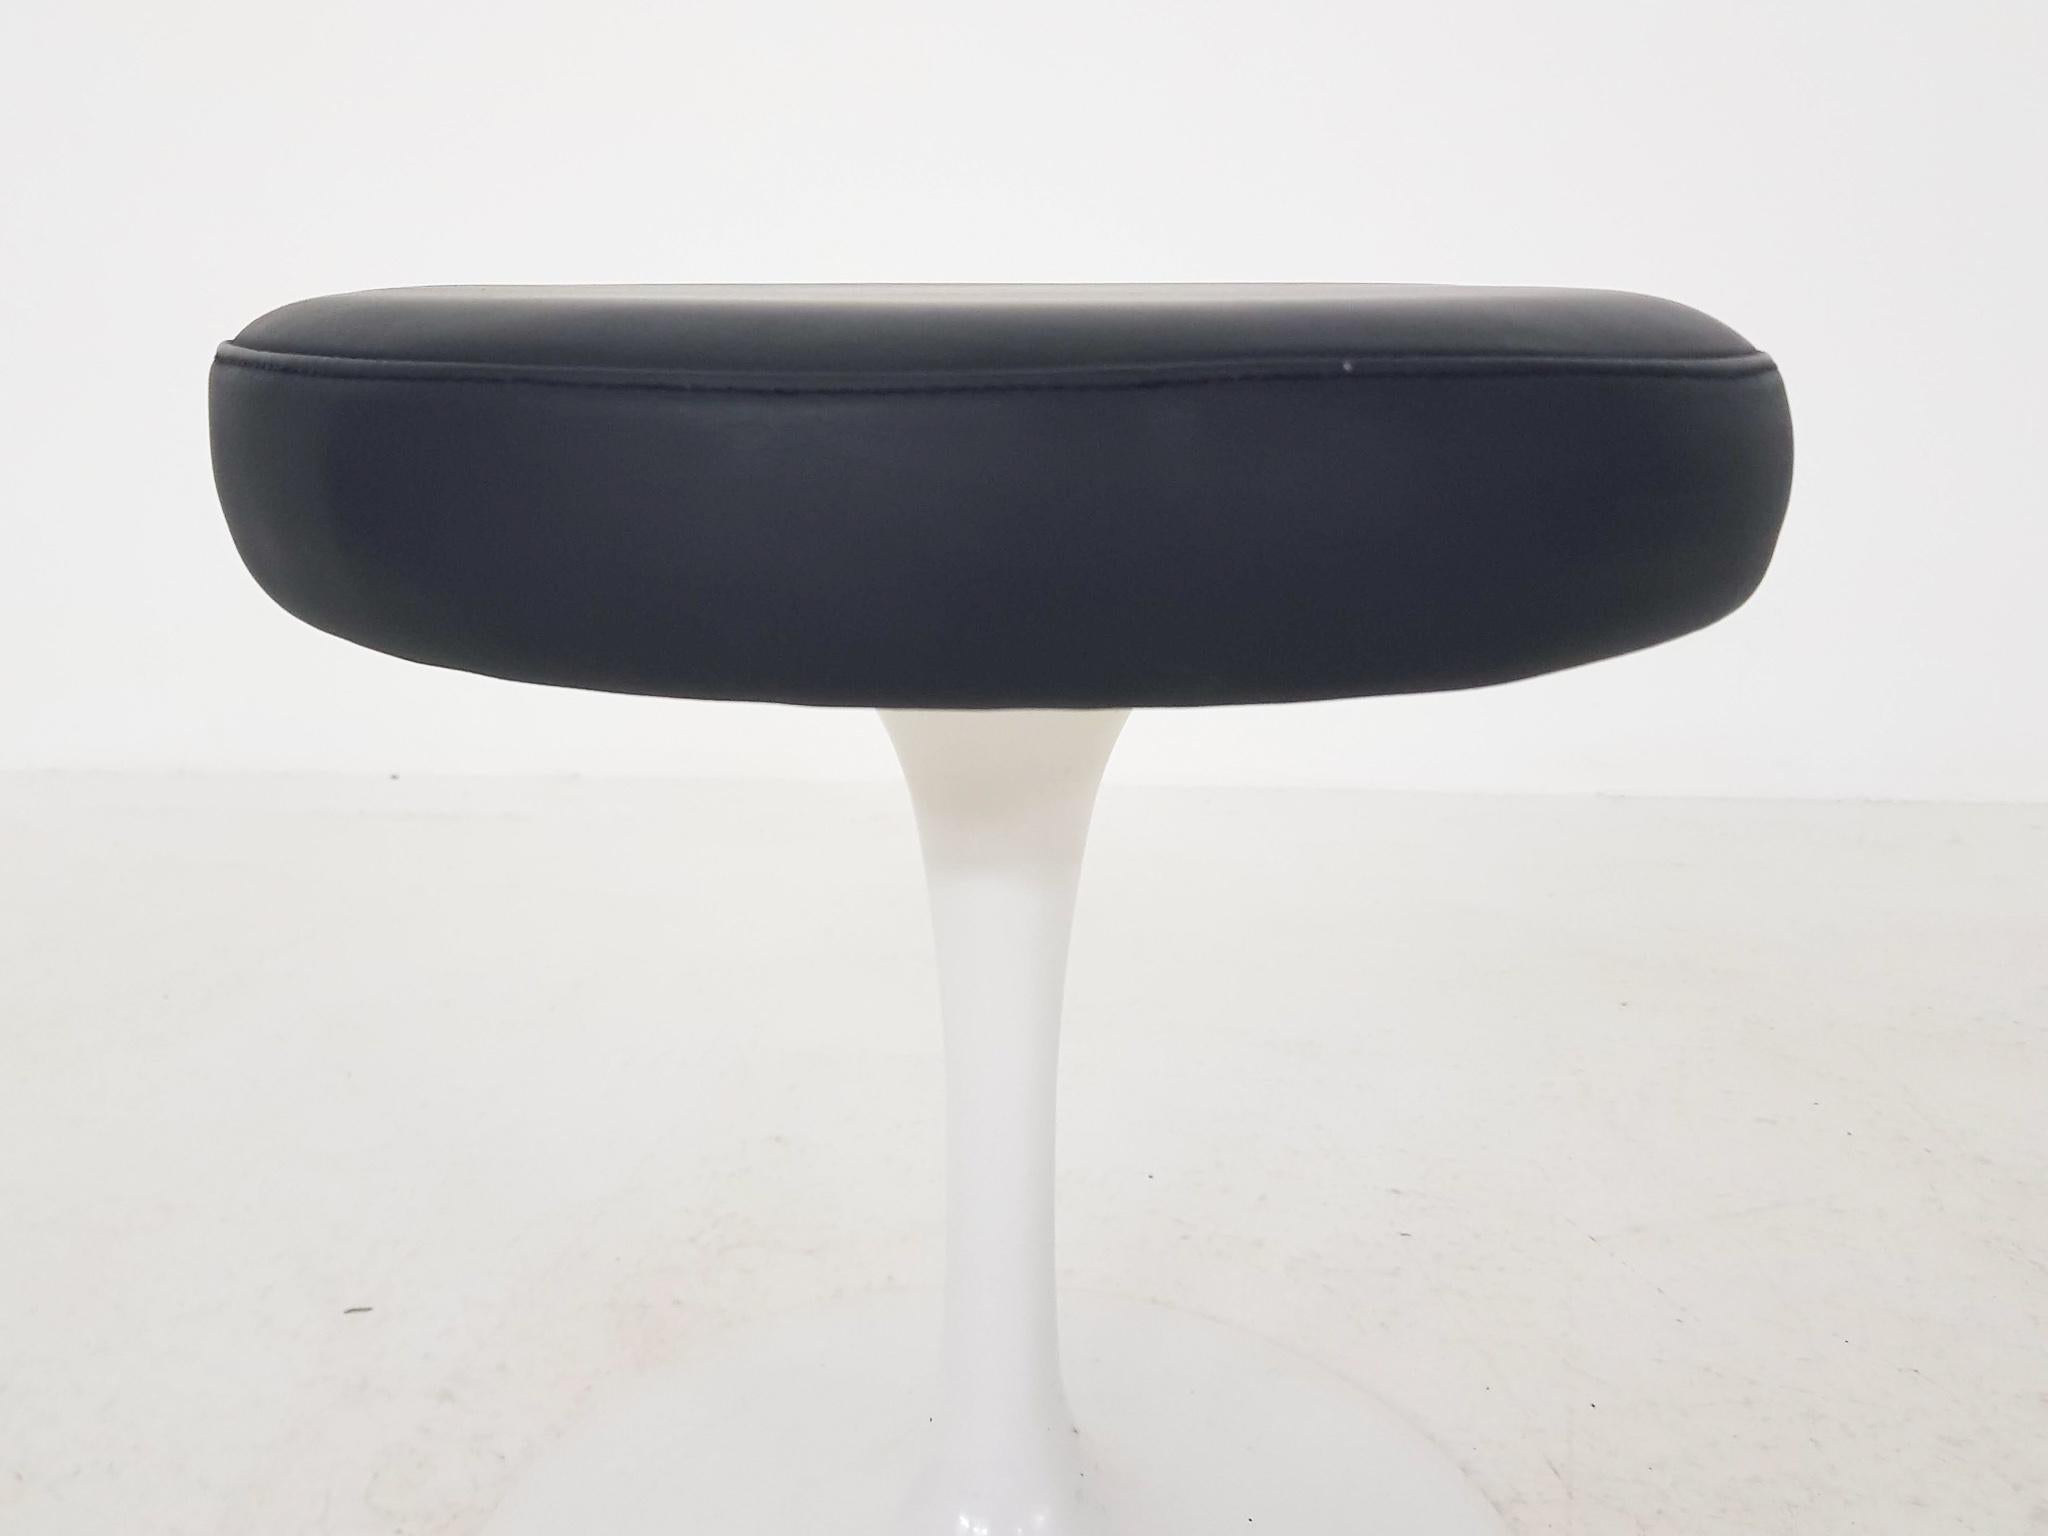 An original and vintage dark blue leather Eero Saarinen swivel tulip stool for Knoll International, 1969.

This is an authentic stool from Eero Saarinen for Knoll International. This stool was once used in the city hall wedding room of Eindhoven the